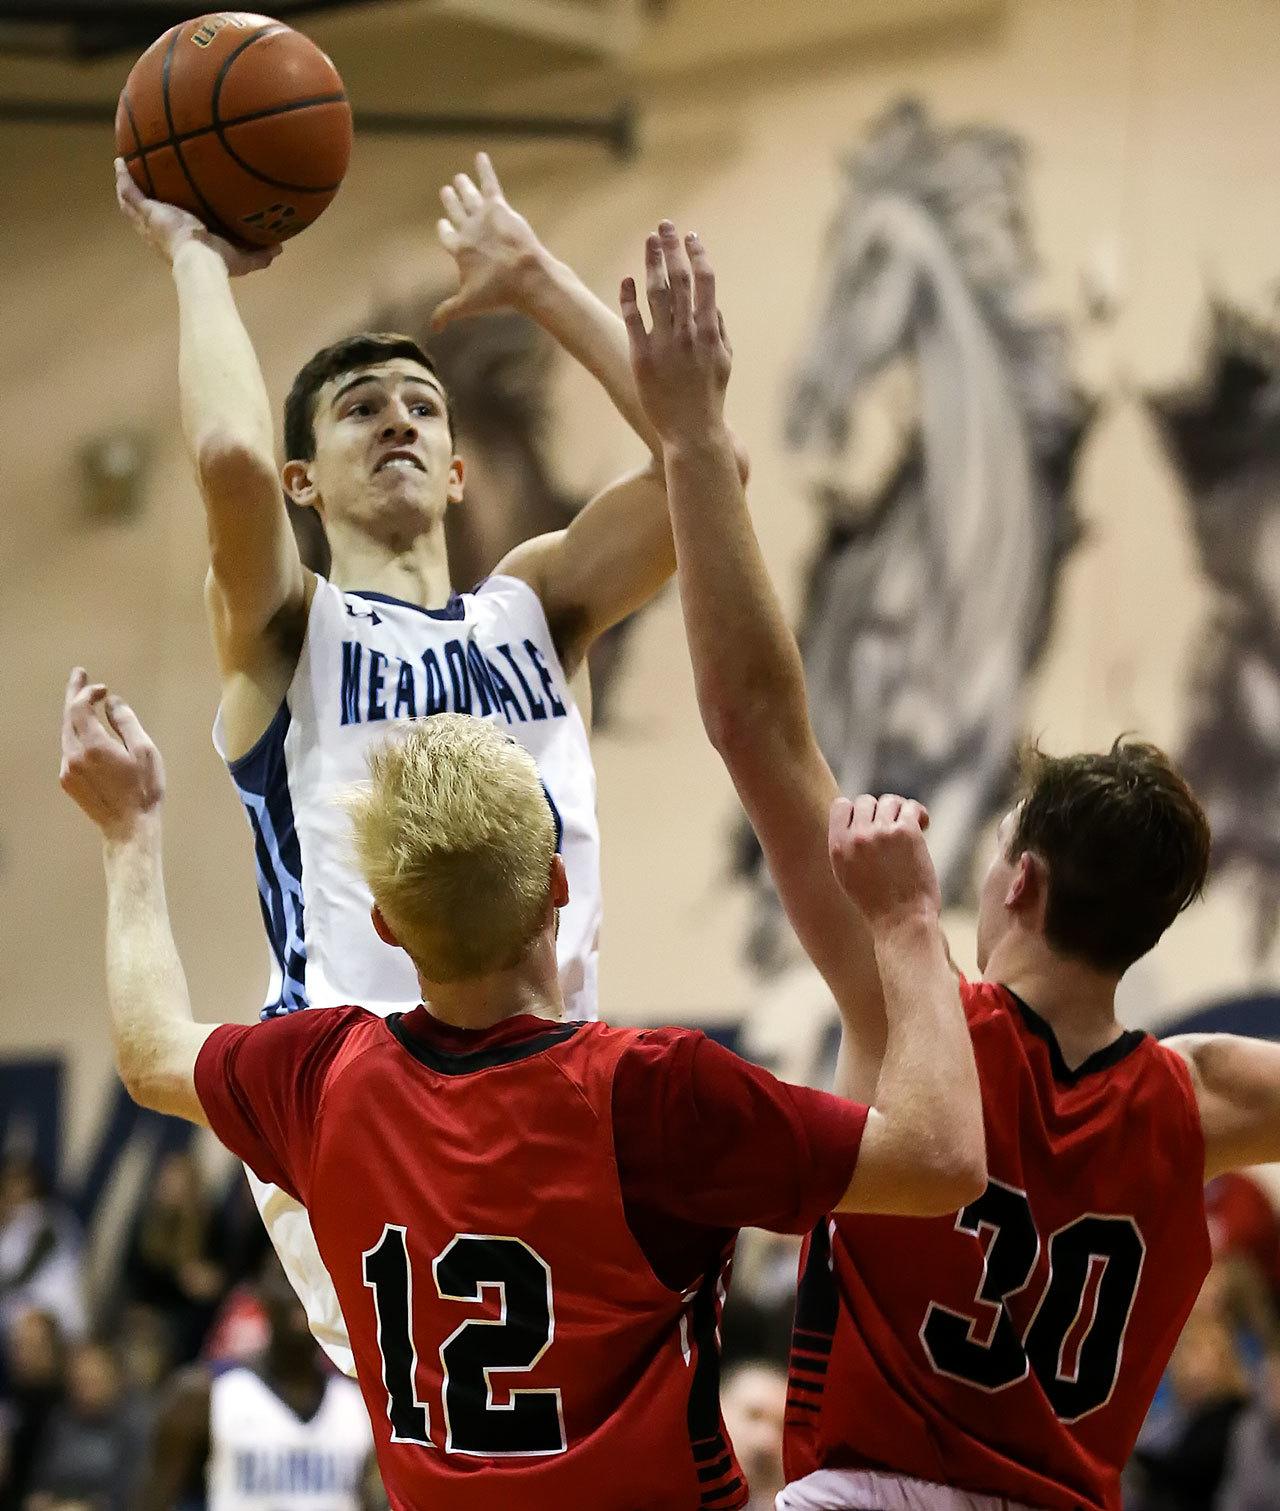 Meadowdale’s Daniel Barhoum attempts a shot over Snohomish’s Tristan MacGregor (left) and Kole Bride (right) during a 3A district play-in game Feb. 10, 2017, at Meadowdale High School in Lynnwood. The Mavericks won 66-54. (Kevin Clark / The Herald)